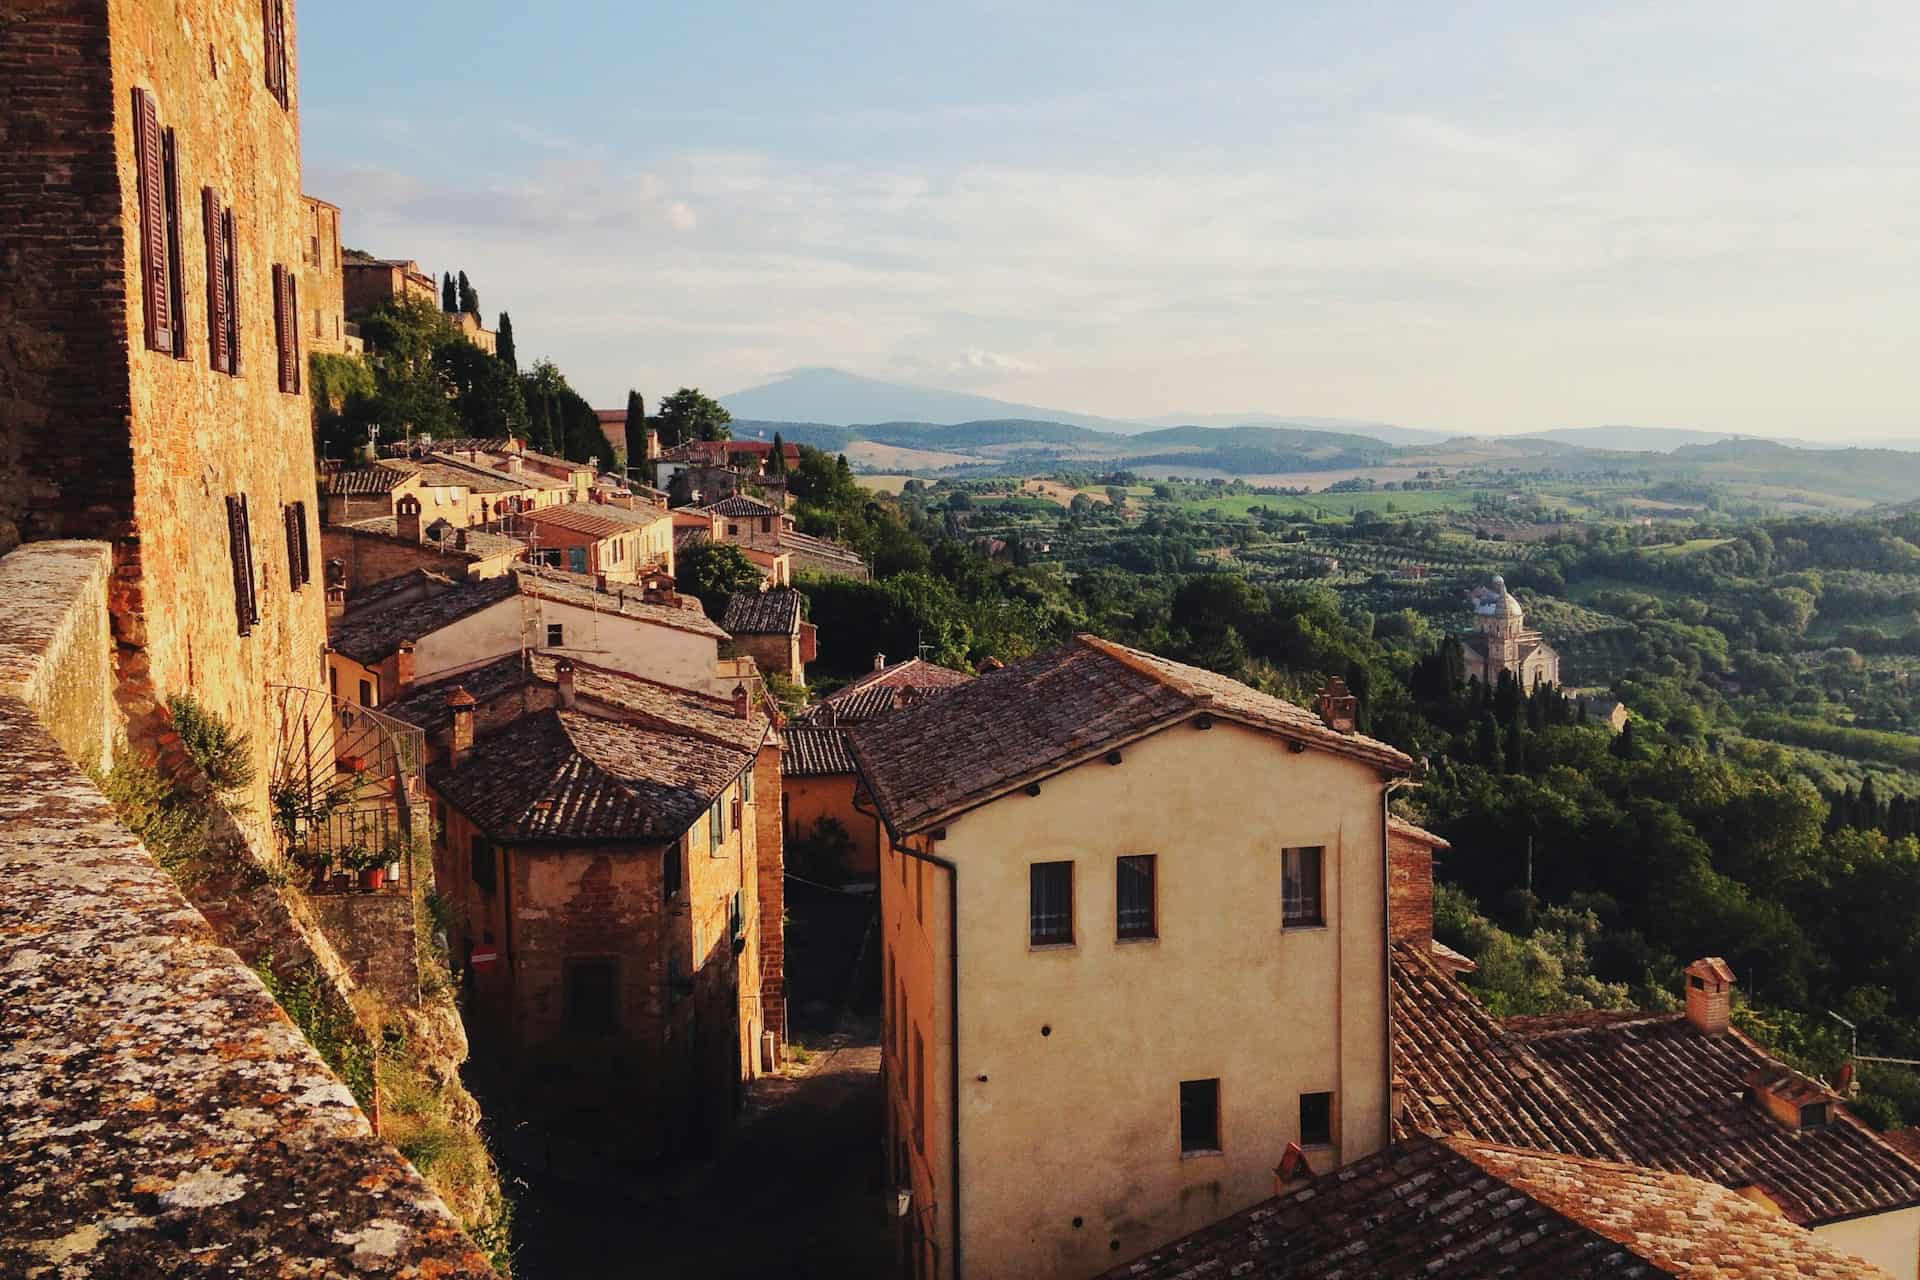 Brown houses on the hillside in Tuscany, Italy